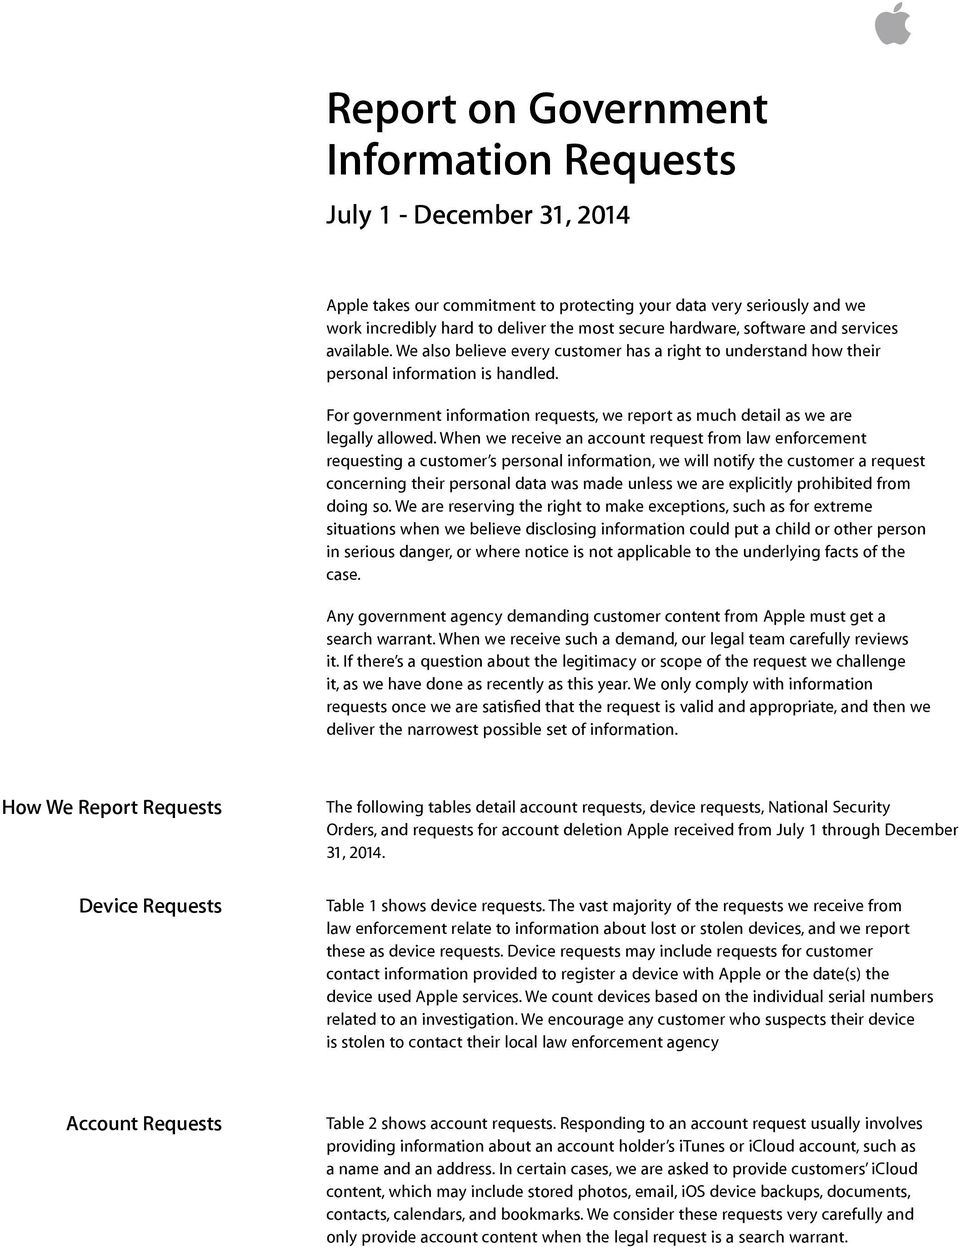 For government information requests, we report as much detail as we are legally allowed.